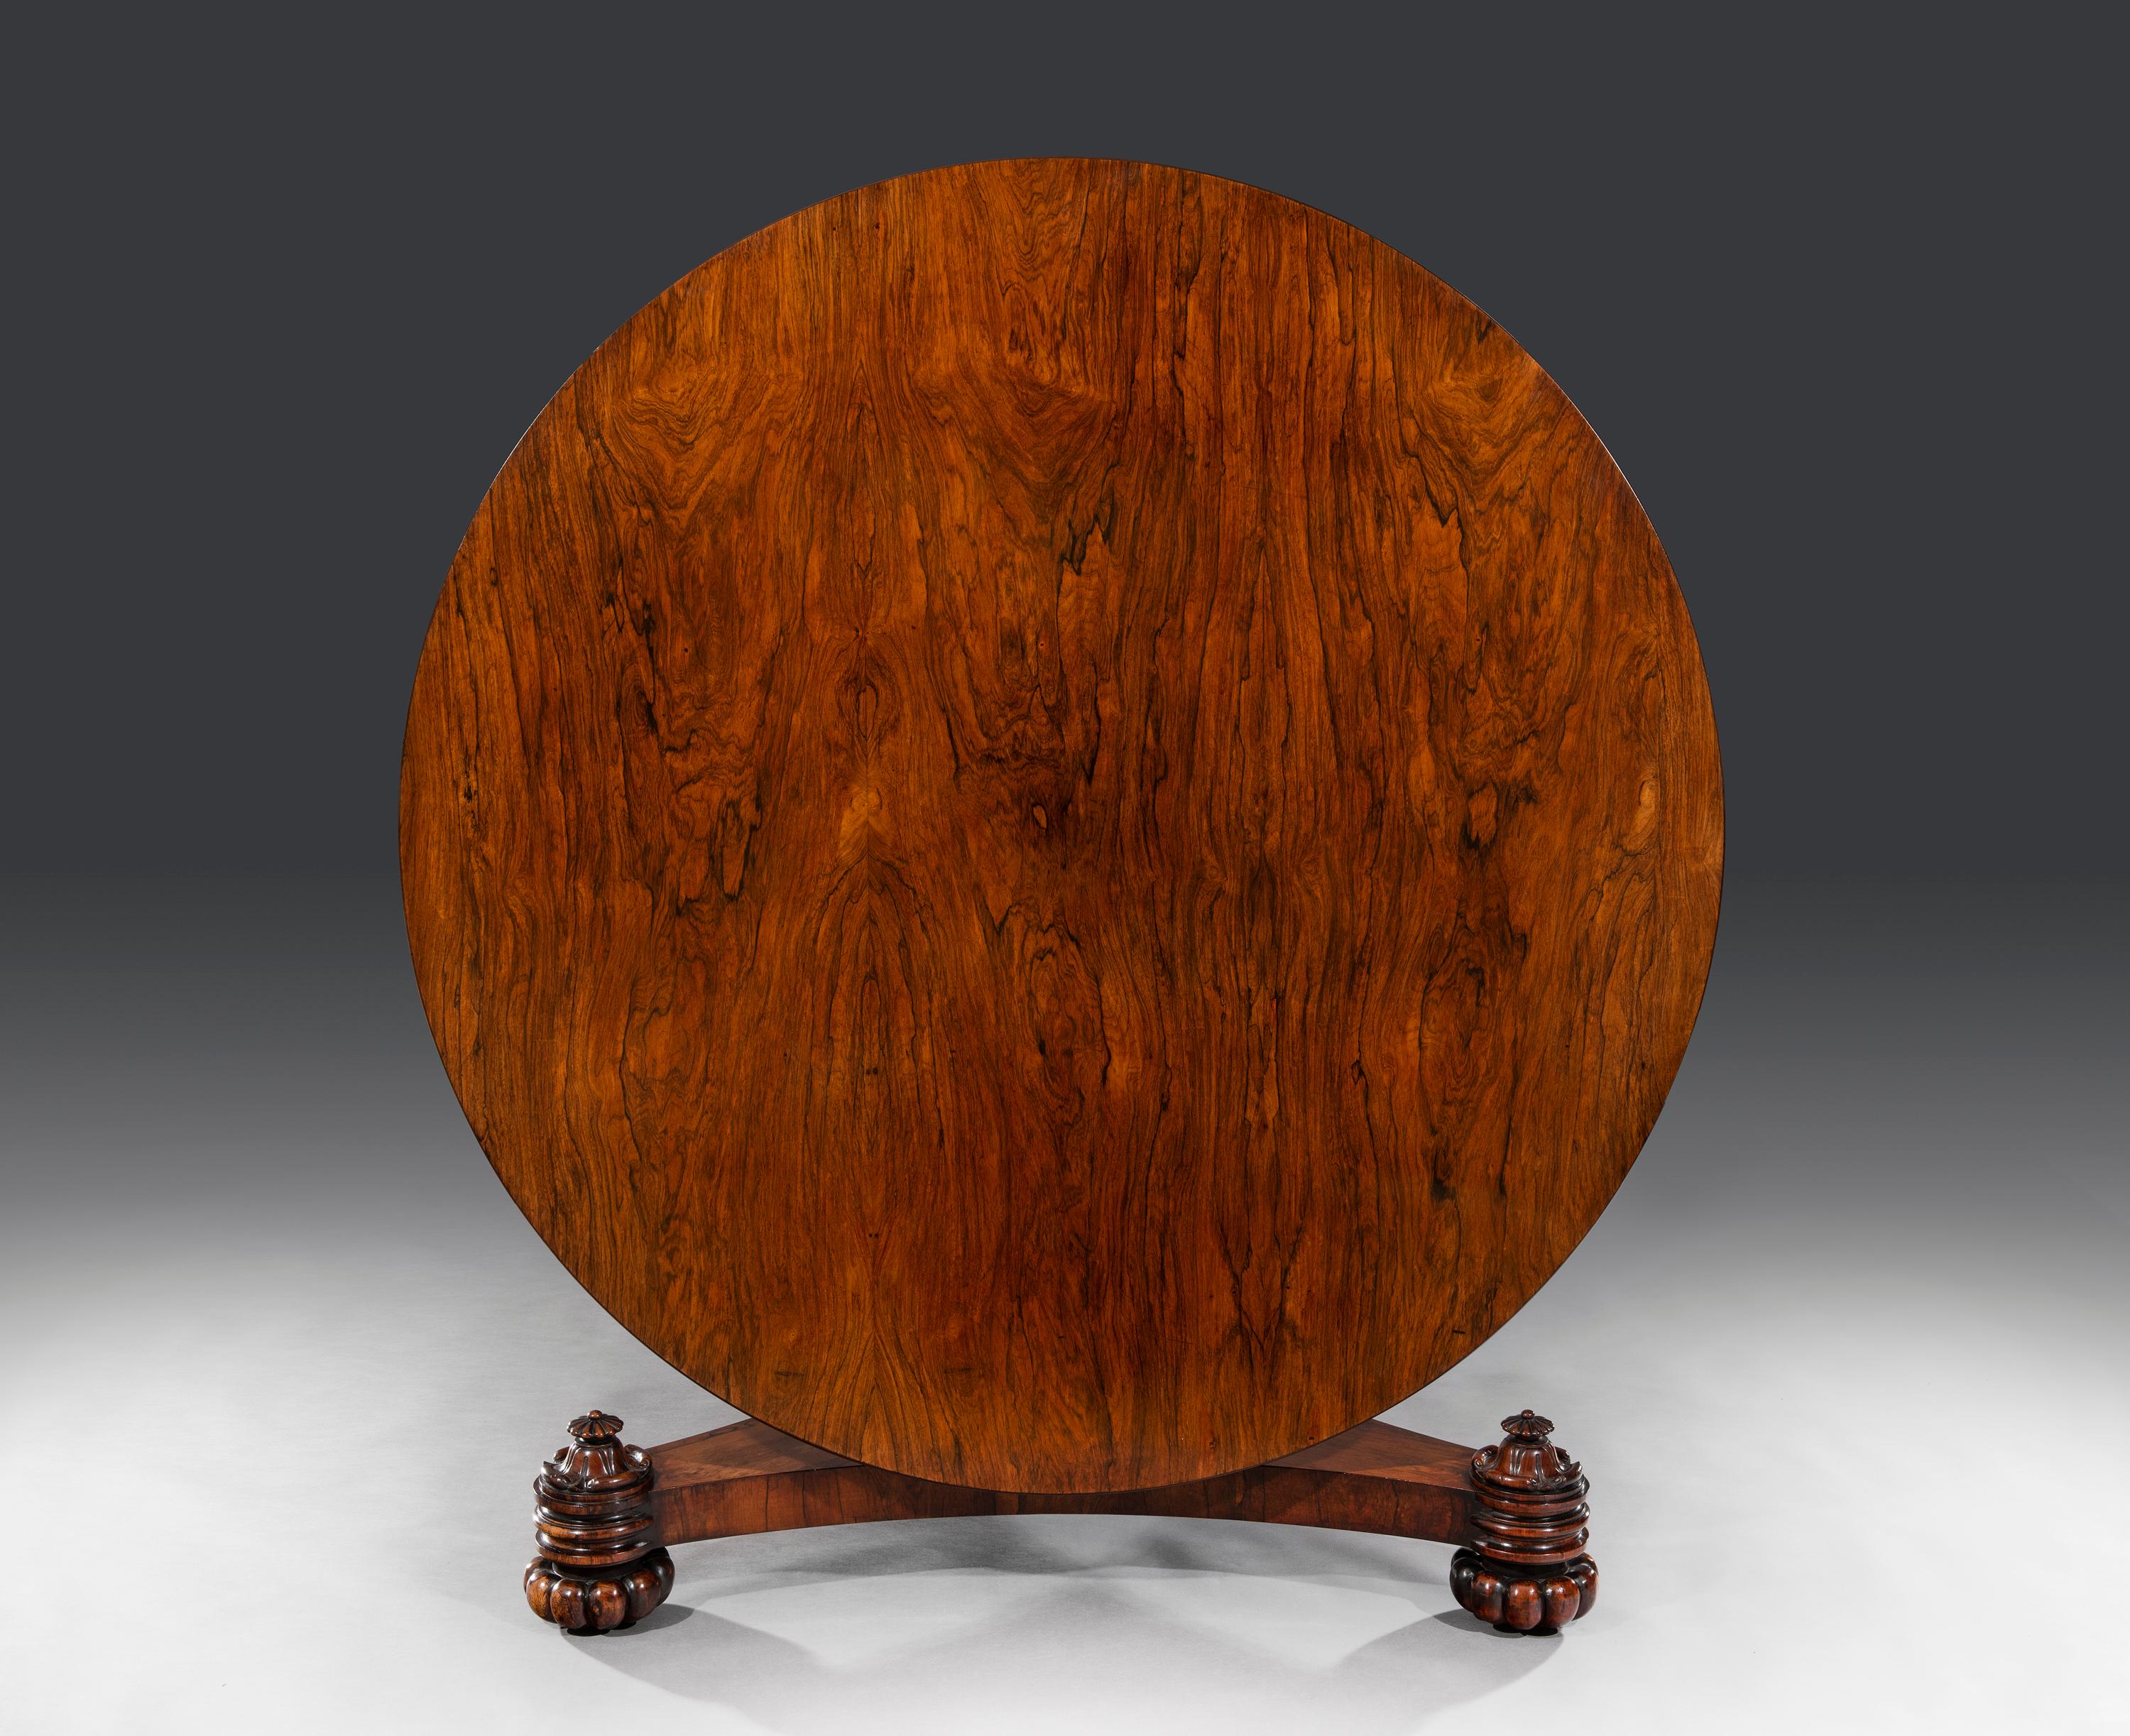 The padouk veneered tilt-top table is 5’ in size. The frieze is cross-banded in rosewood and the carcass is mahogany. The tale top sits on a pedestal and a concave triform base. The table will accommodate up to eight people and stands on a crisply